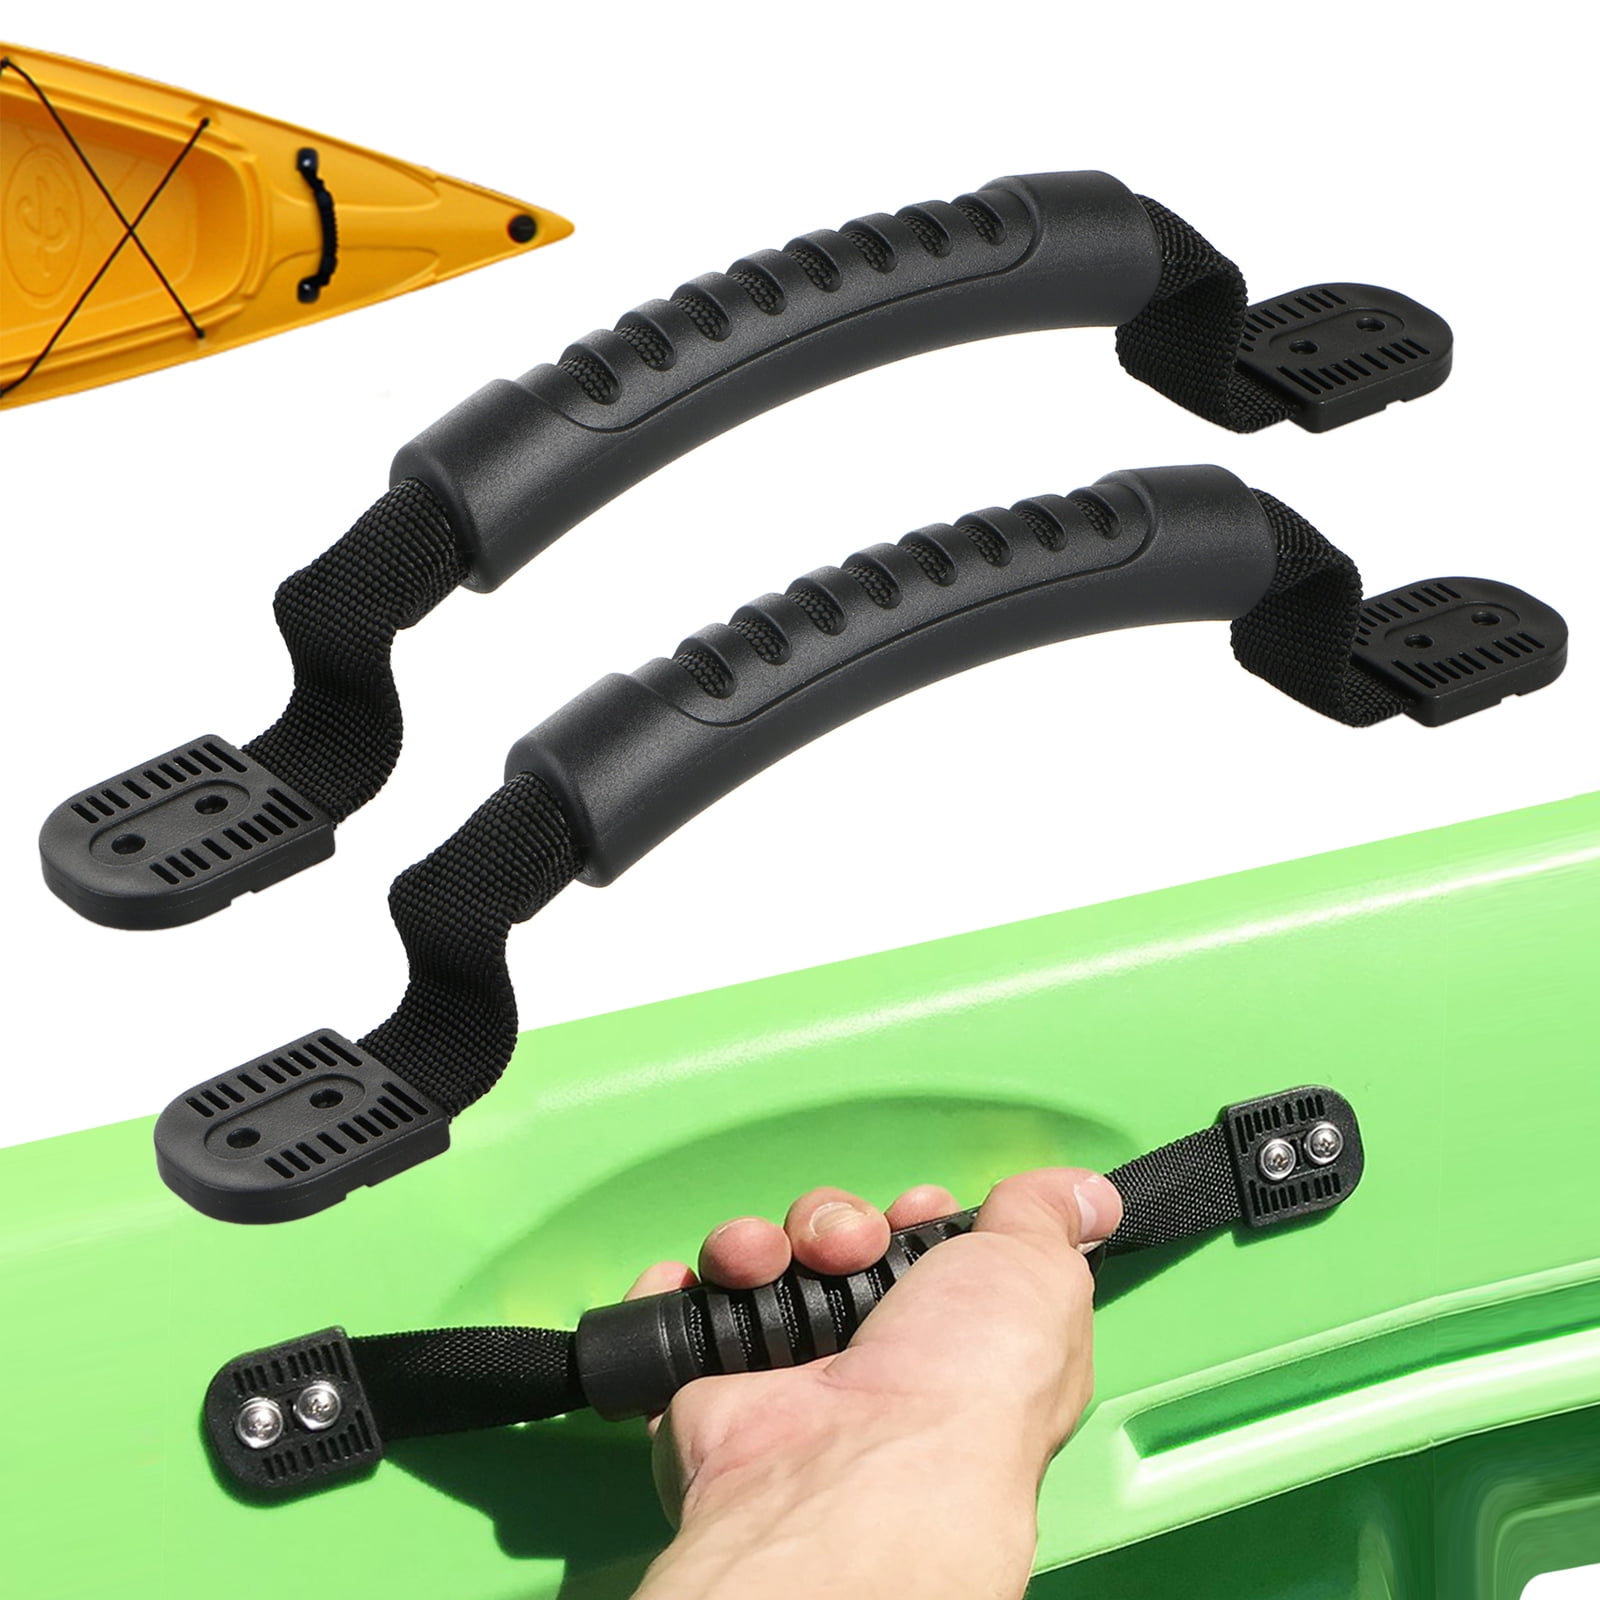 2X Kayak Canoe Boat Side Mount Carry Handle With Bungee Cord Screws Accessories 